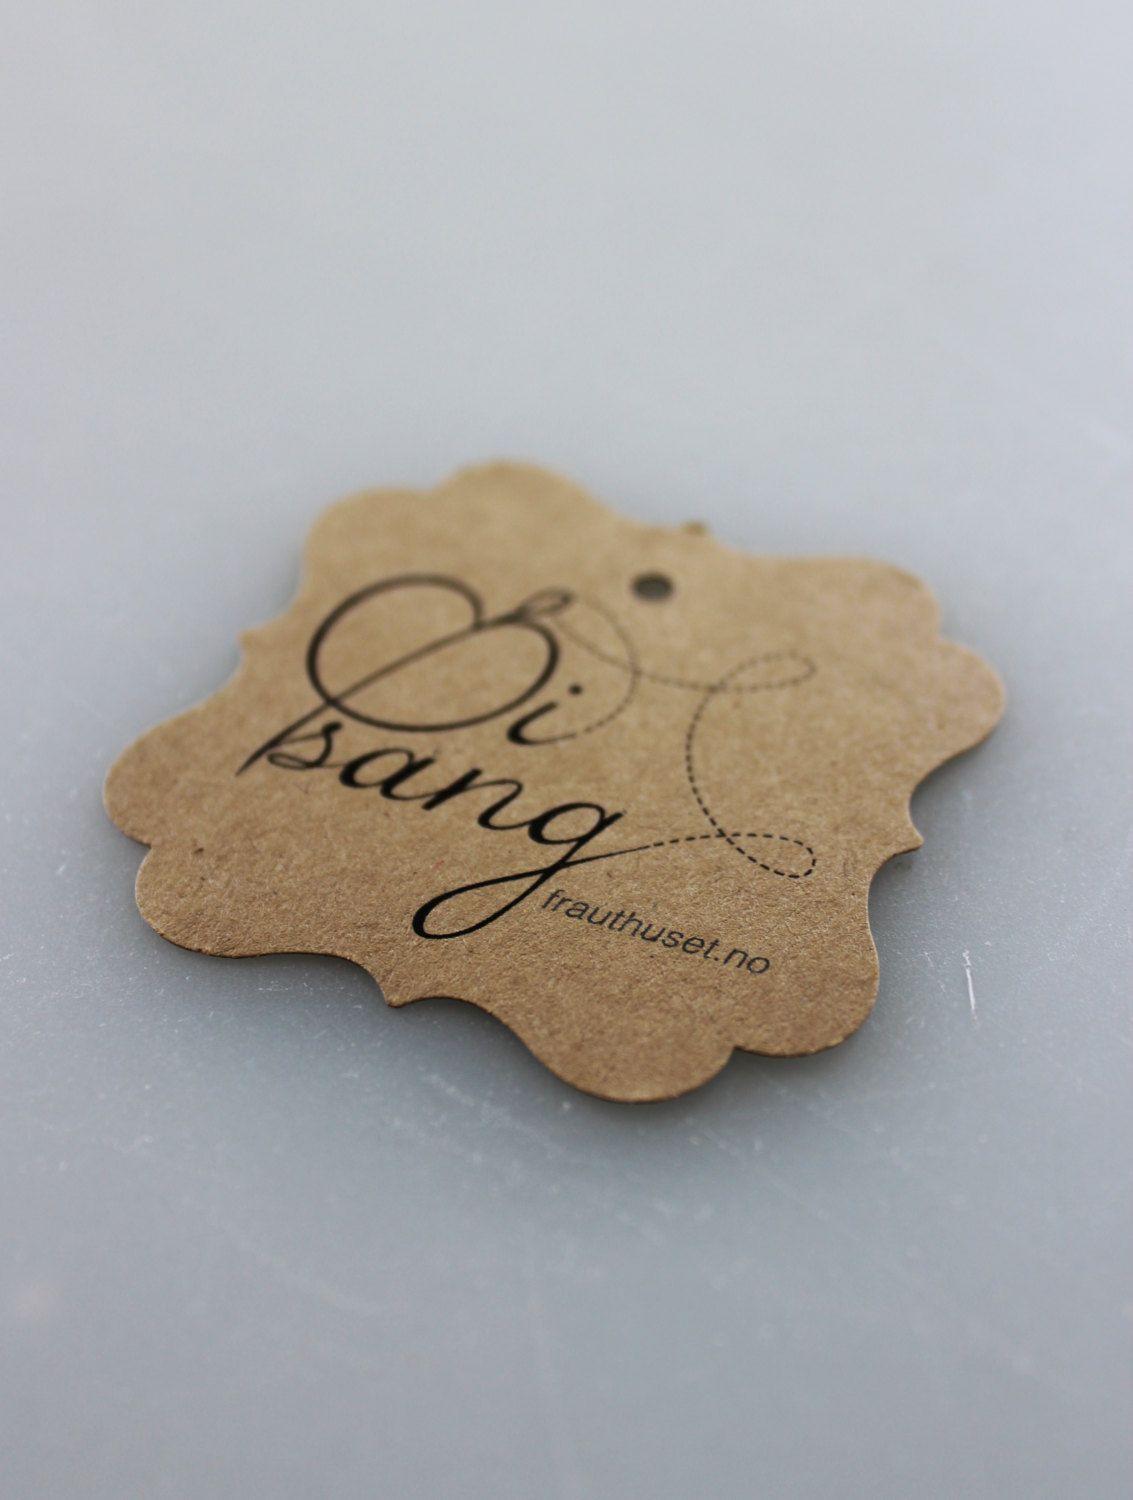 Merchandise Tags with Logo - Merchandise Swing Tags Customized with Your Logo Handmade Items ...